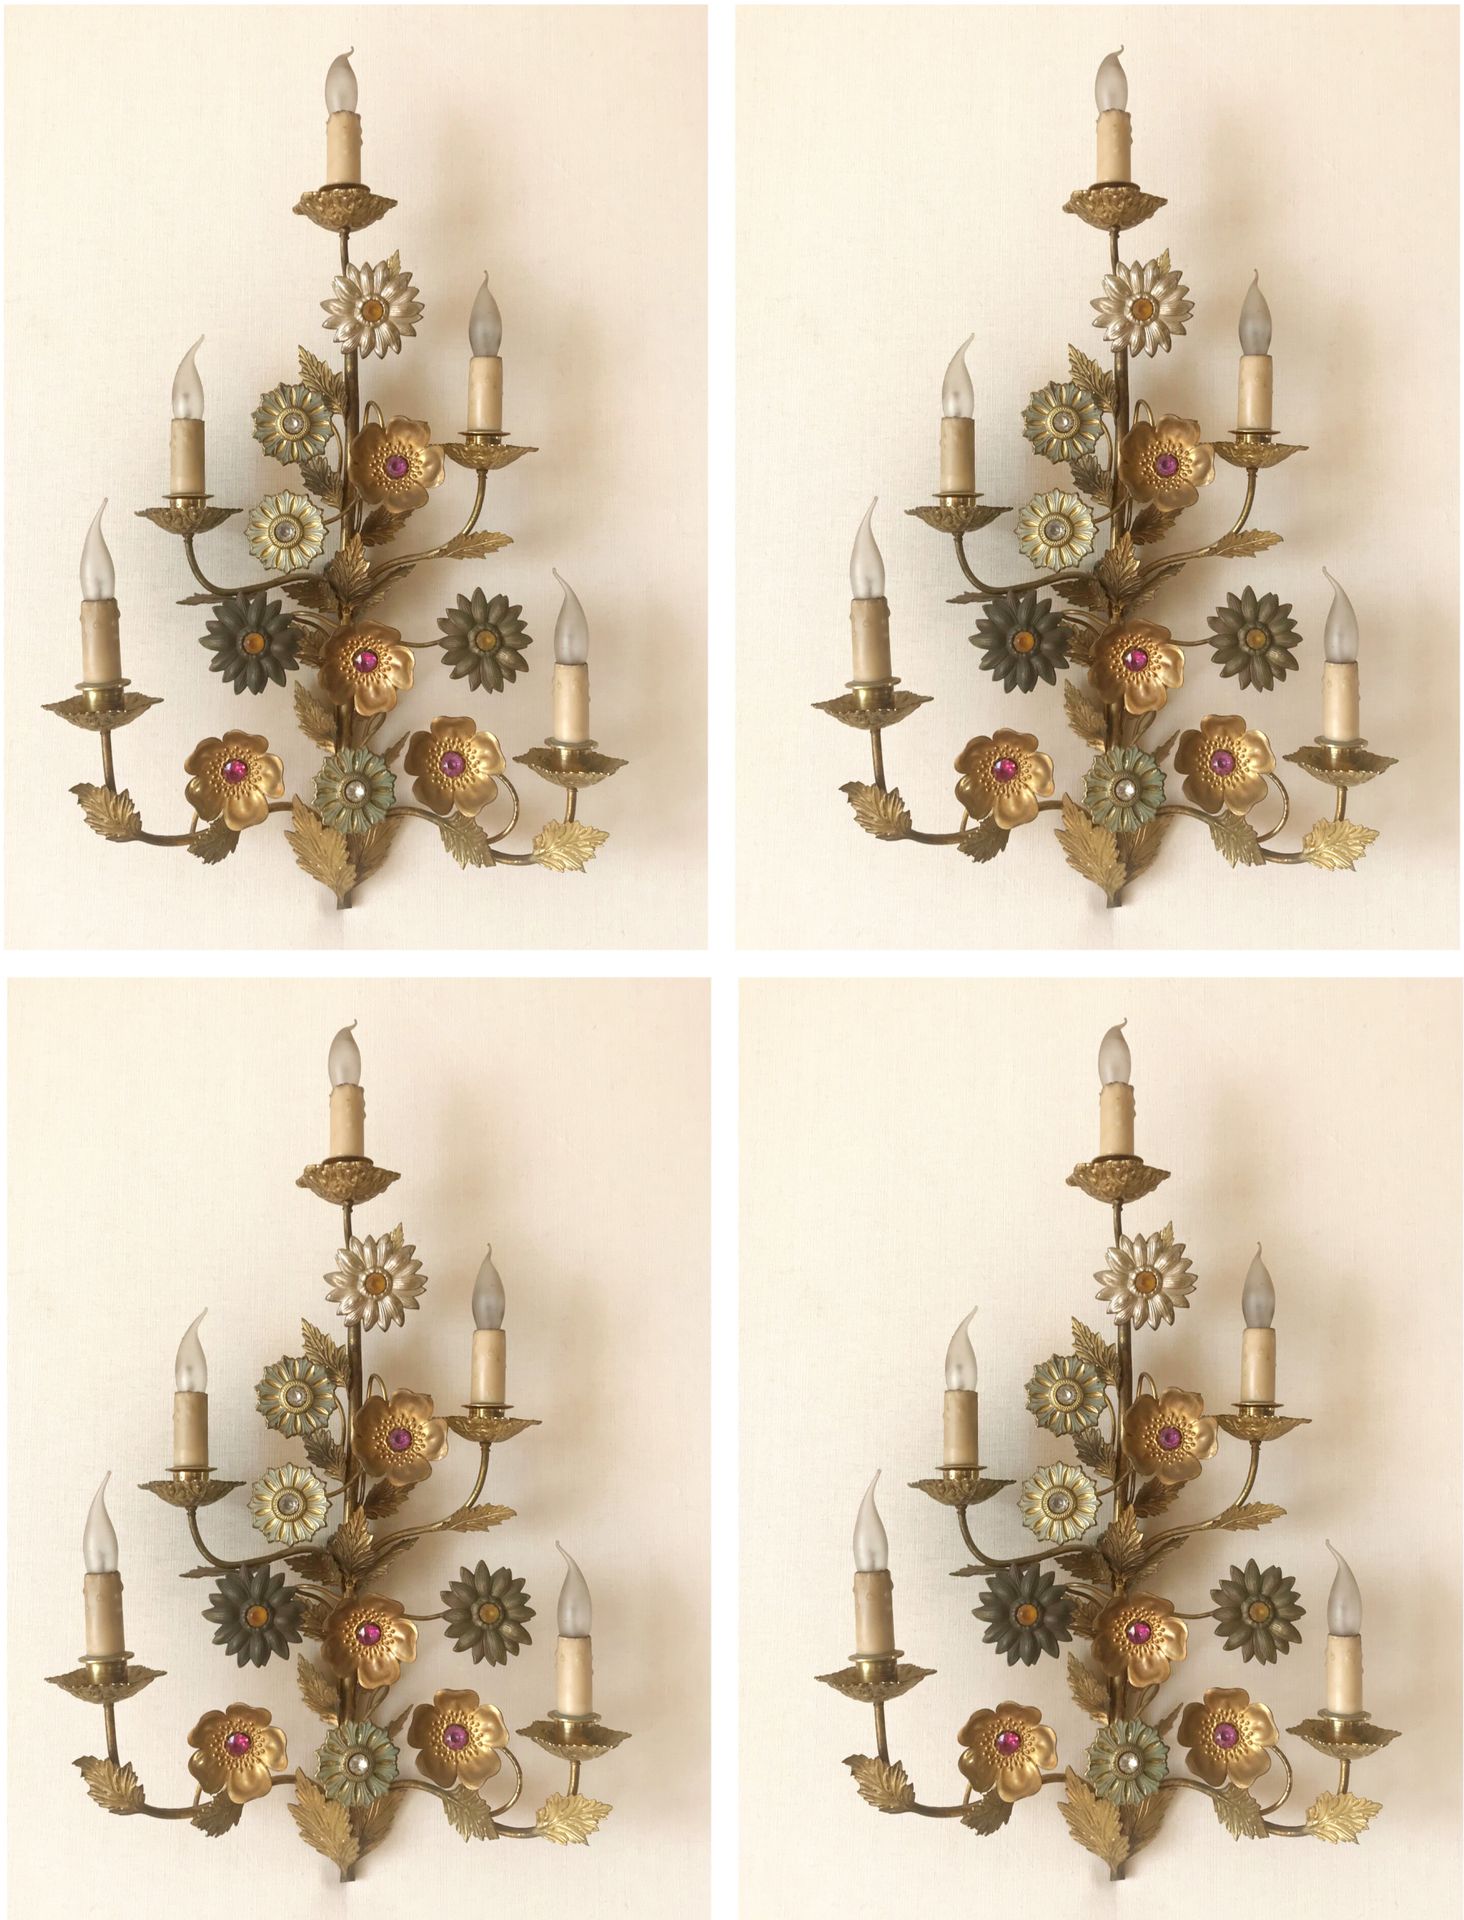 Maison JANSEN Attributed to the House of JANSEN 

Suite of four sconces with fiv&hellip;